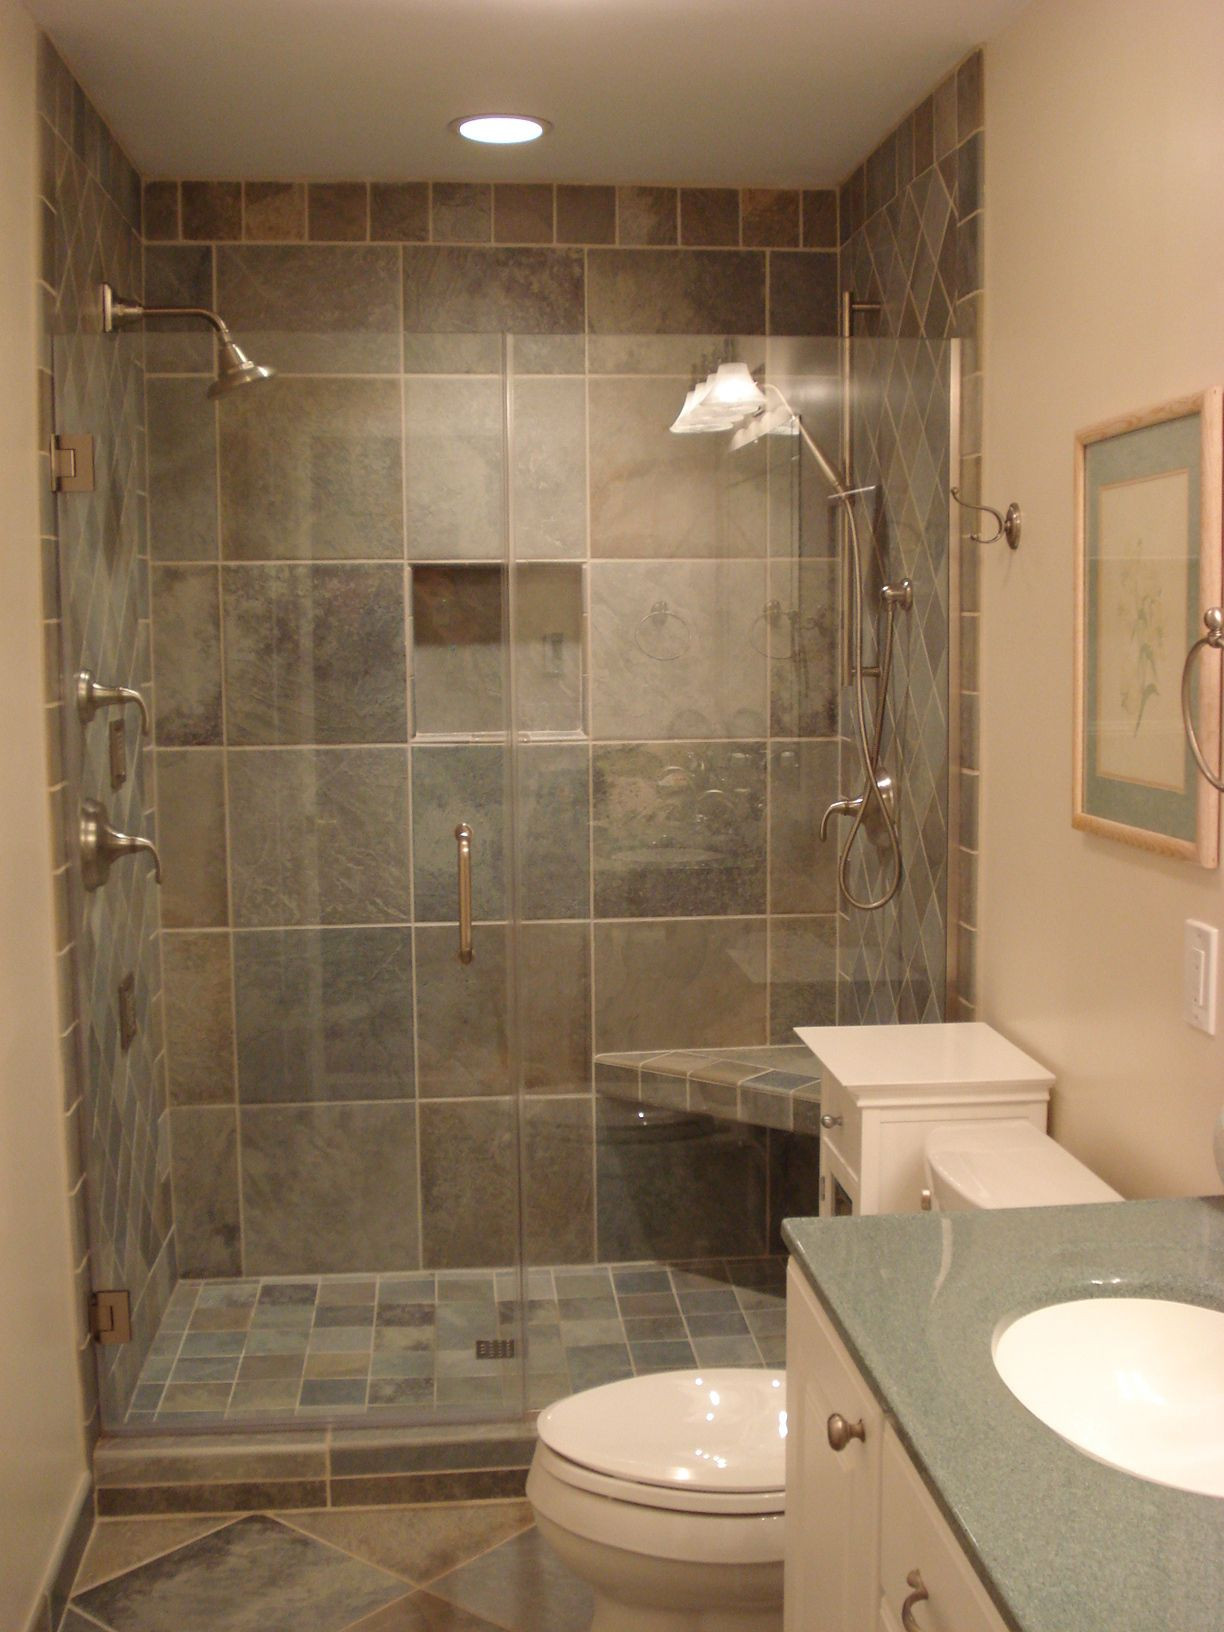 Shower Only Bathroom
 Bathroom and Shower Remodel Ideas and Tricks for a Limited